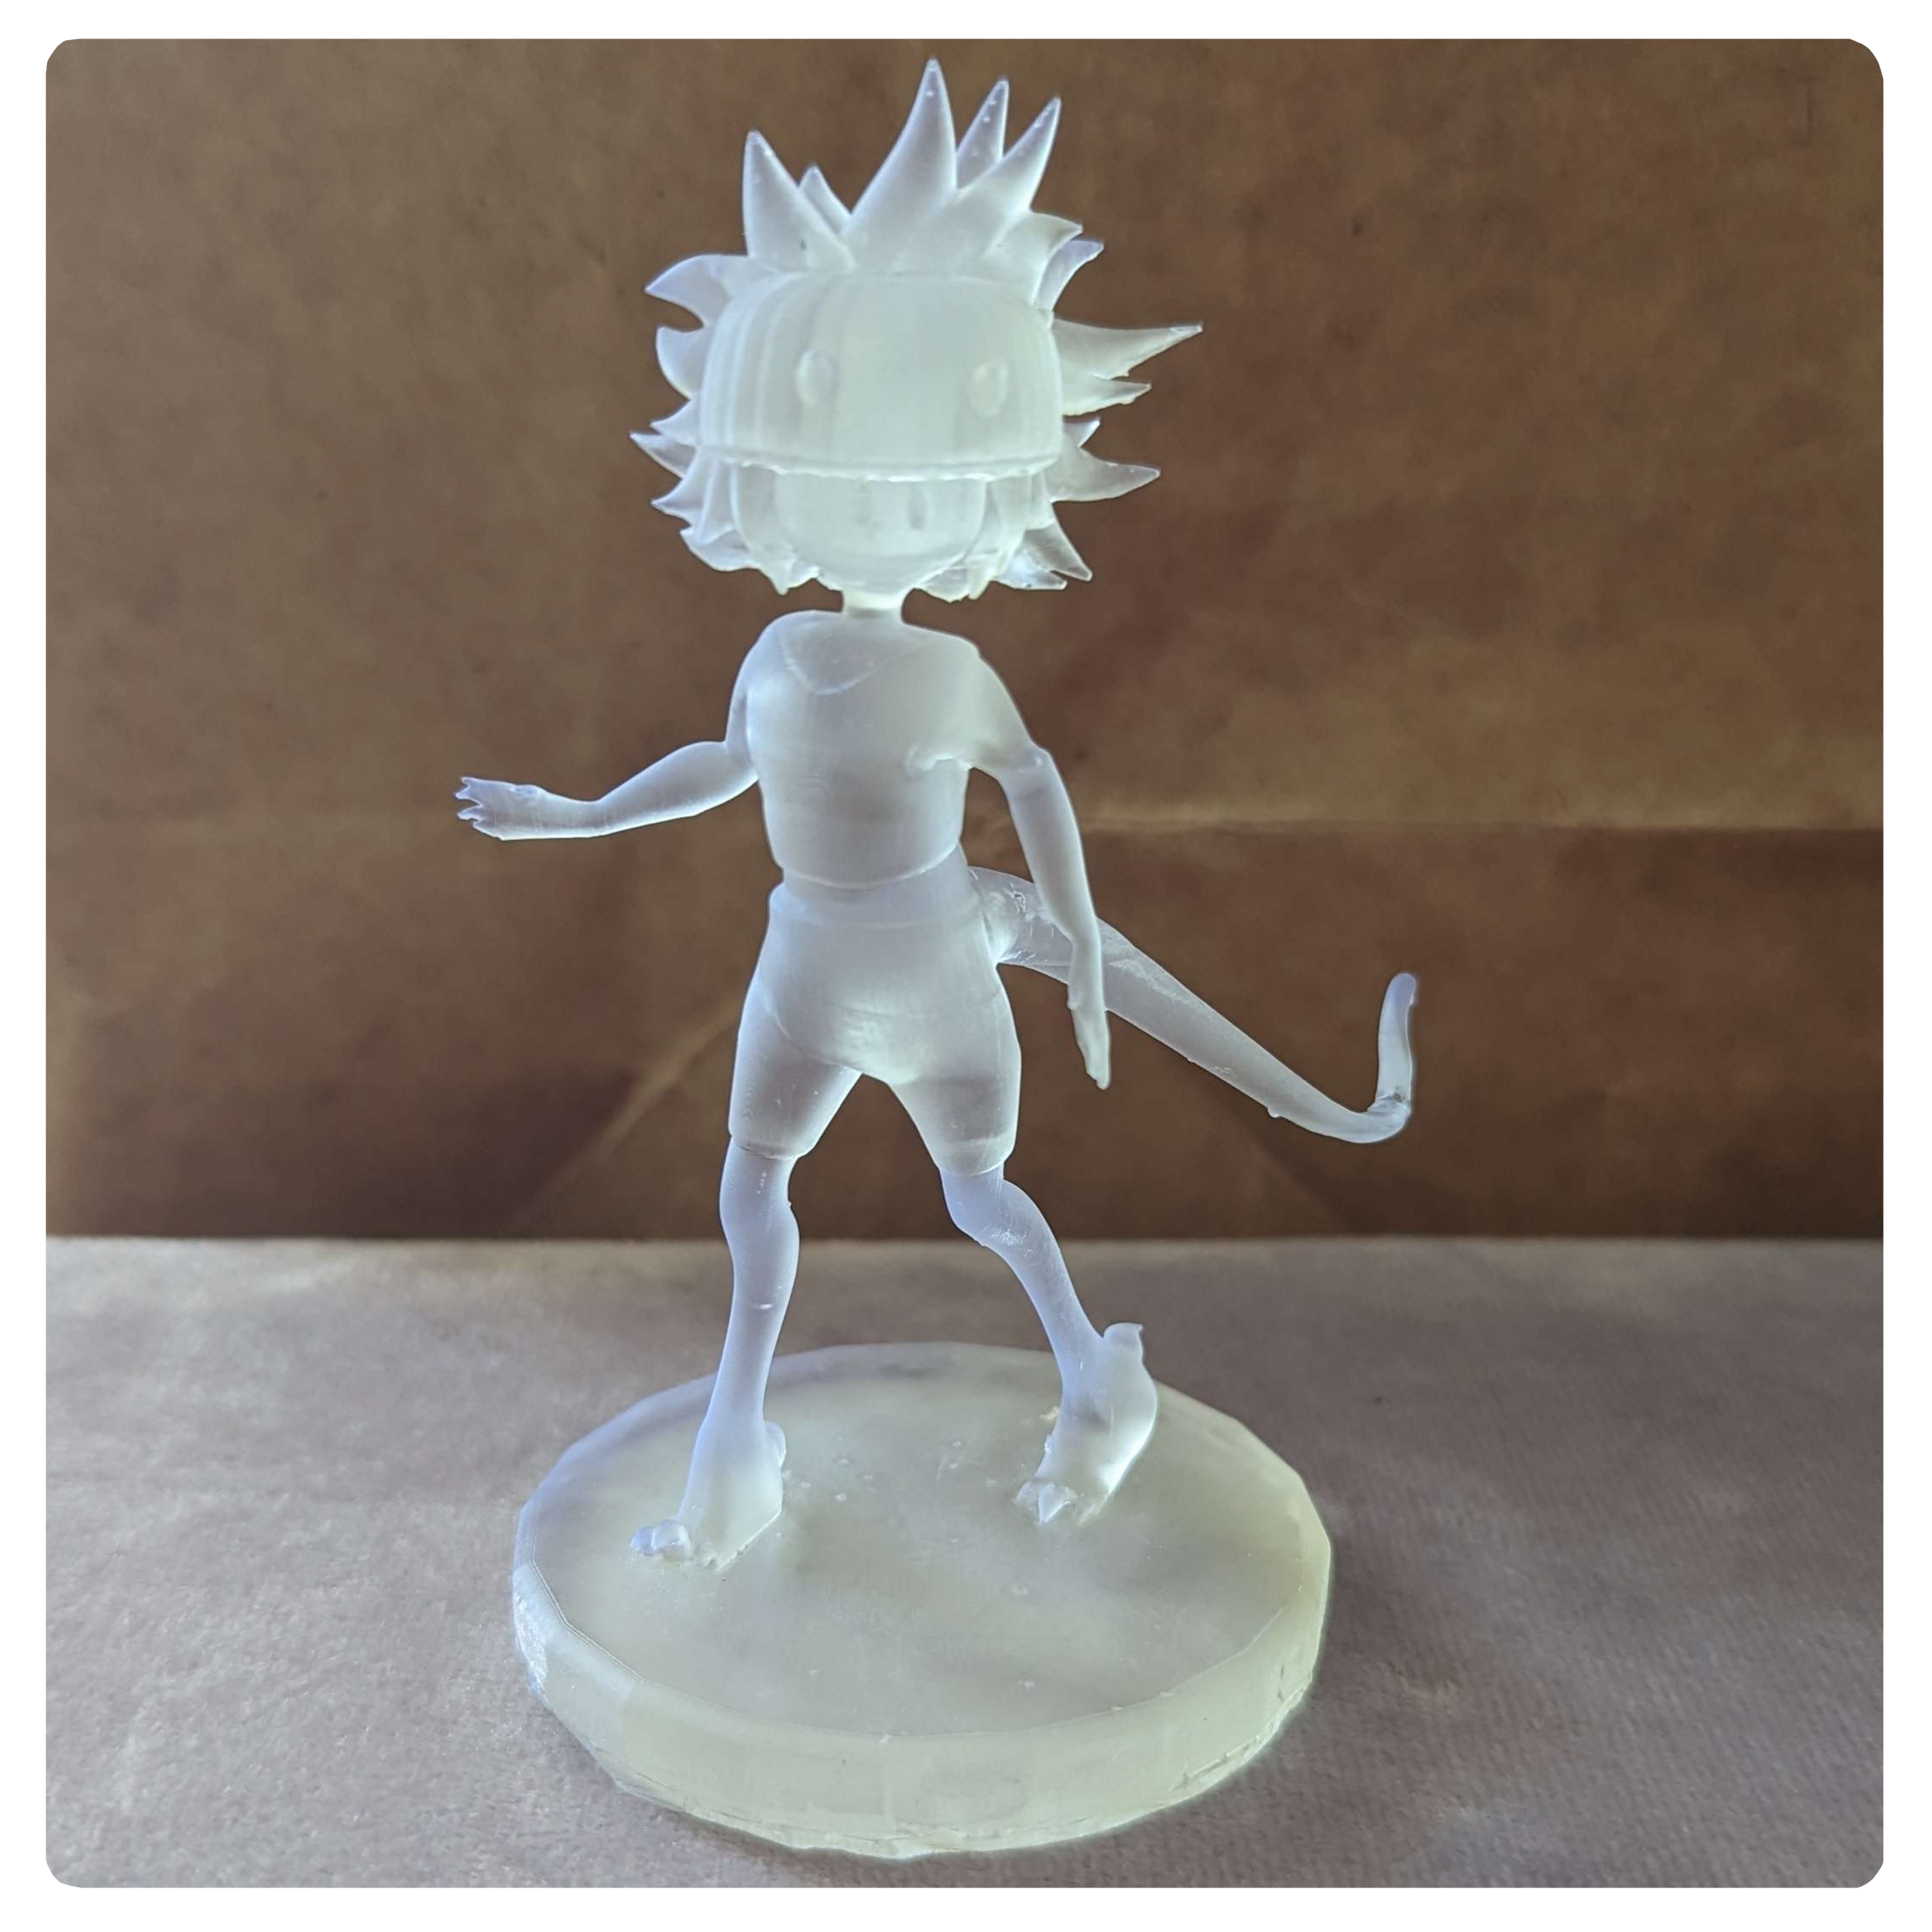 Clerocore - Mo Character Model in 3D (Printed)